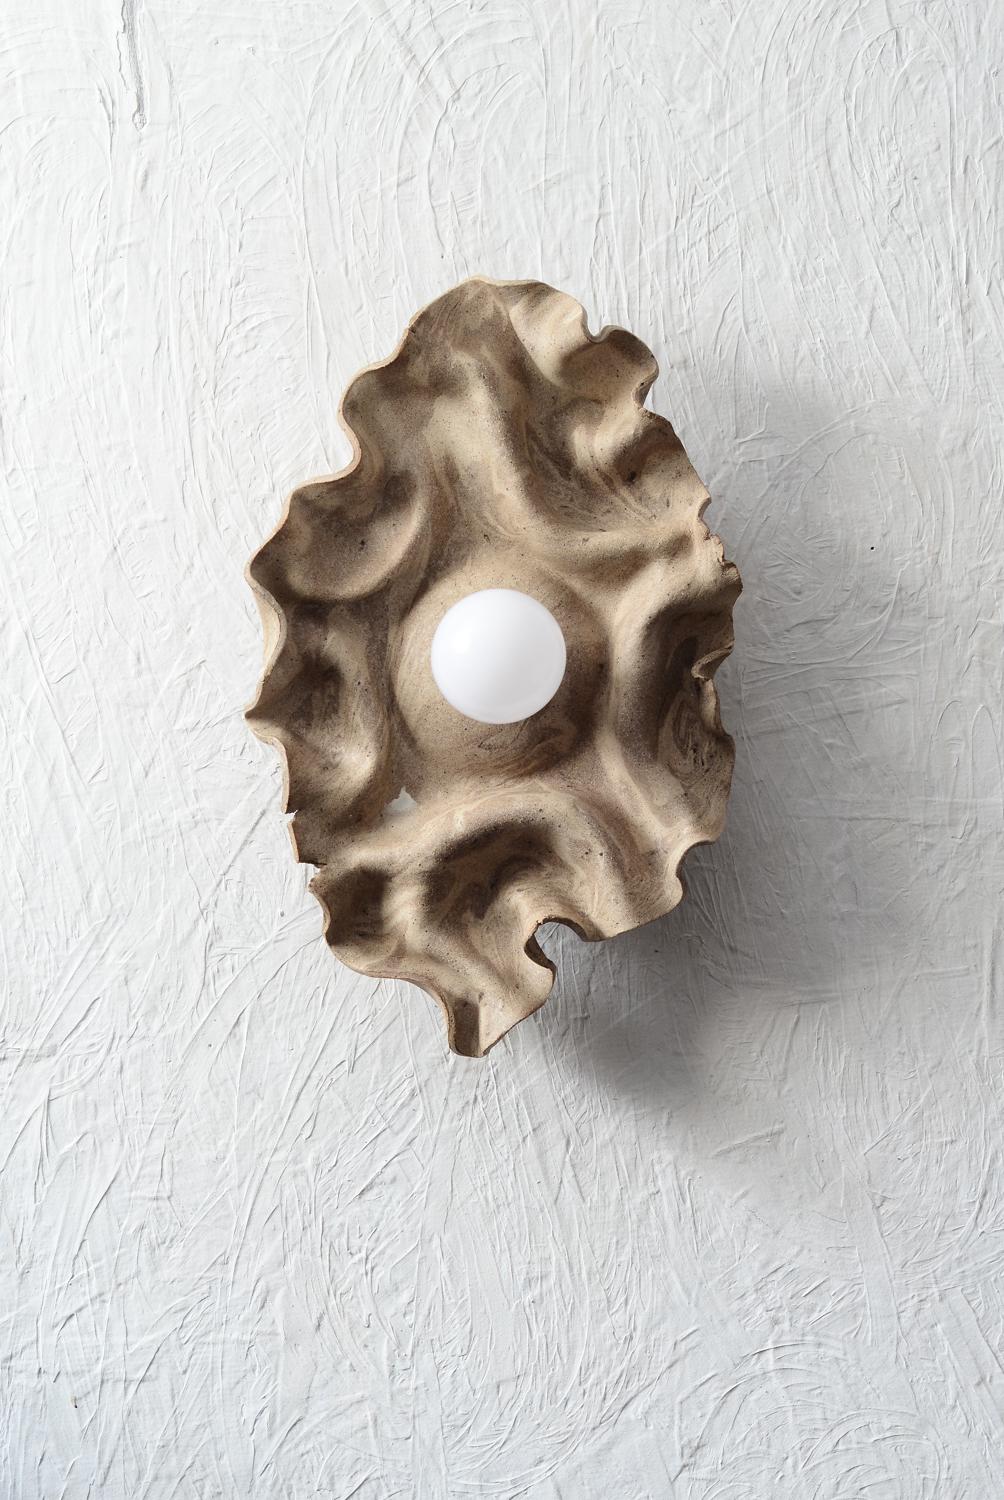 Handbuilt ceramic wall sconce with draped/folded  marbled stoneware clay, reminiscent of the natural world.
Meticulously crafted by the artist, The nature of the technique used to shape the clay adds a touch of uniqueness to each piece.
The sconce